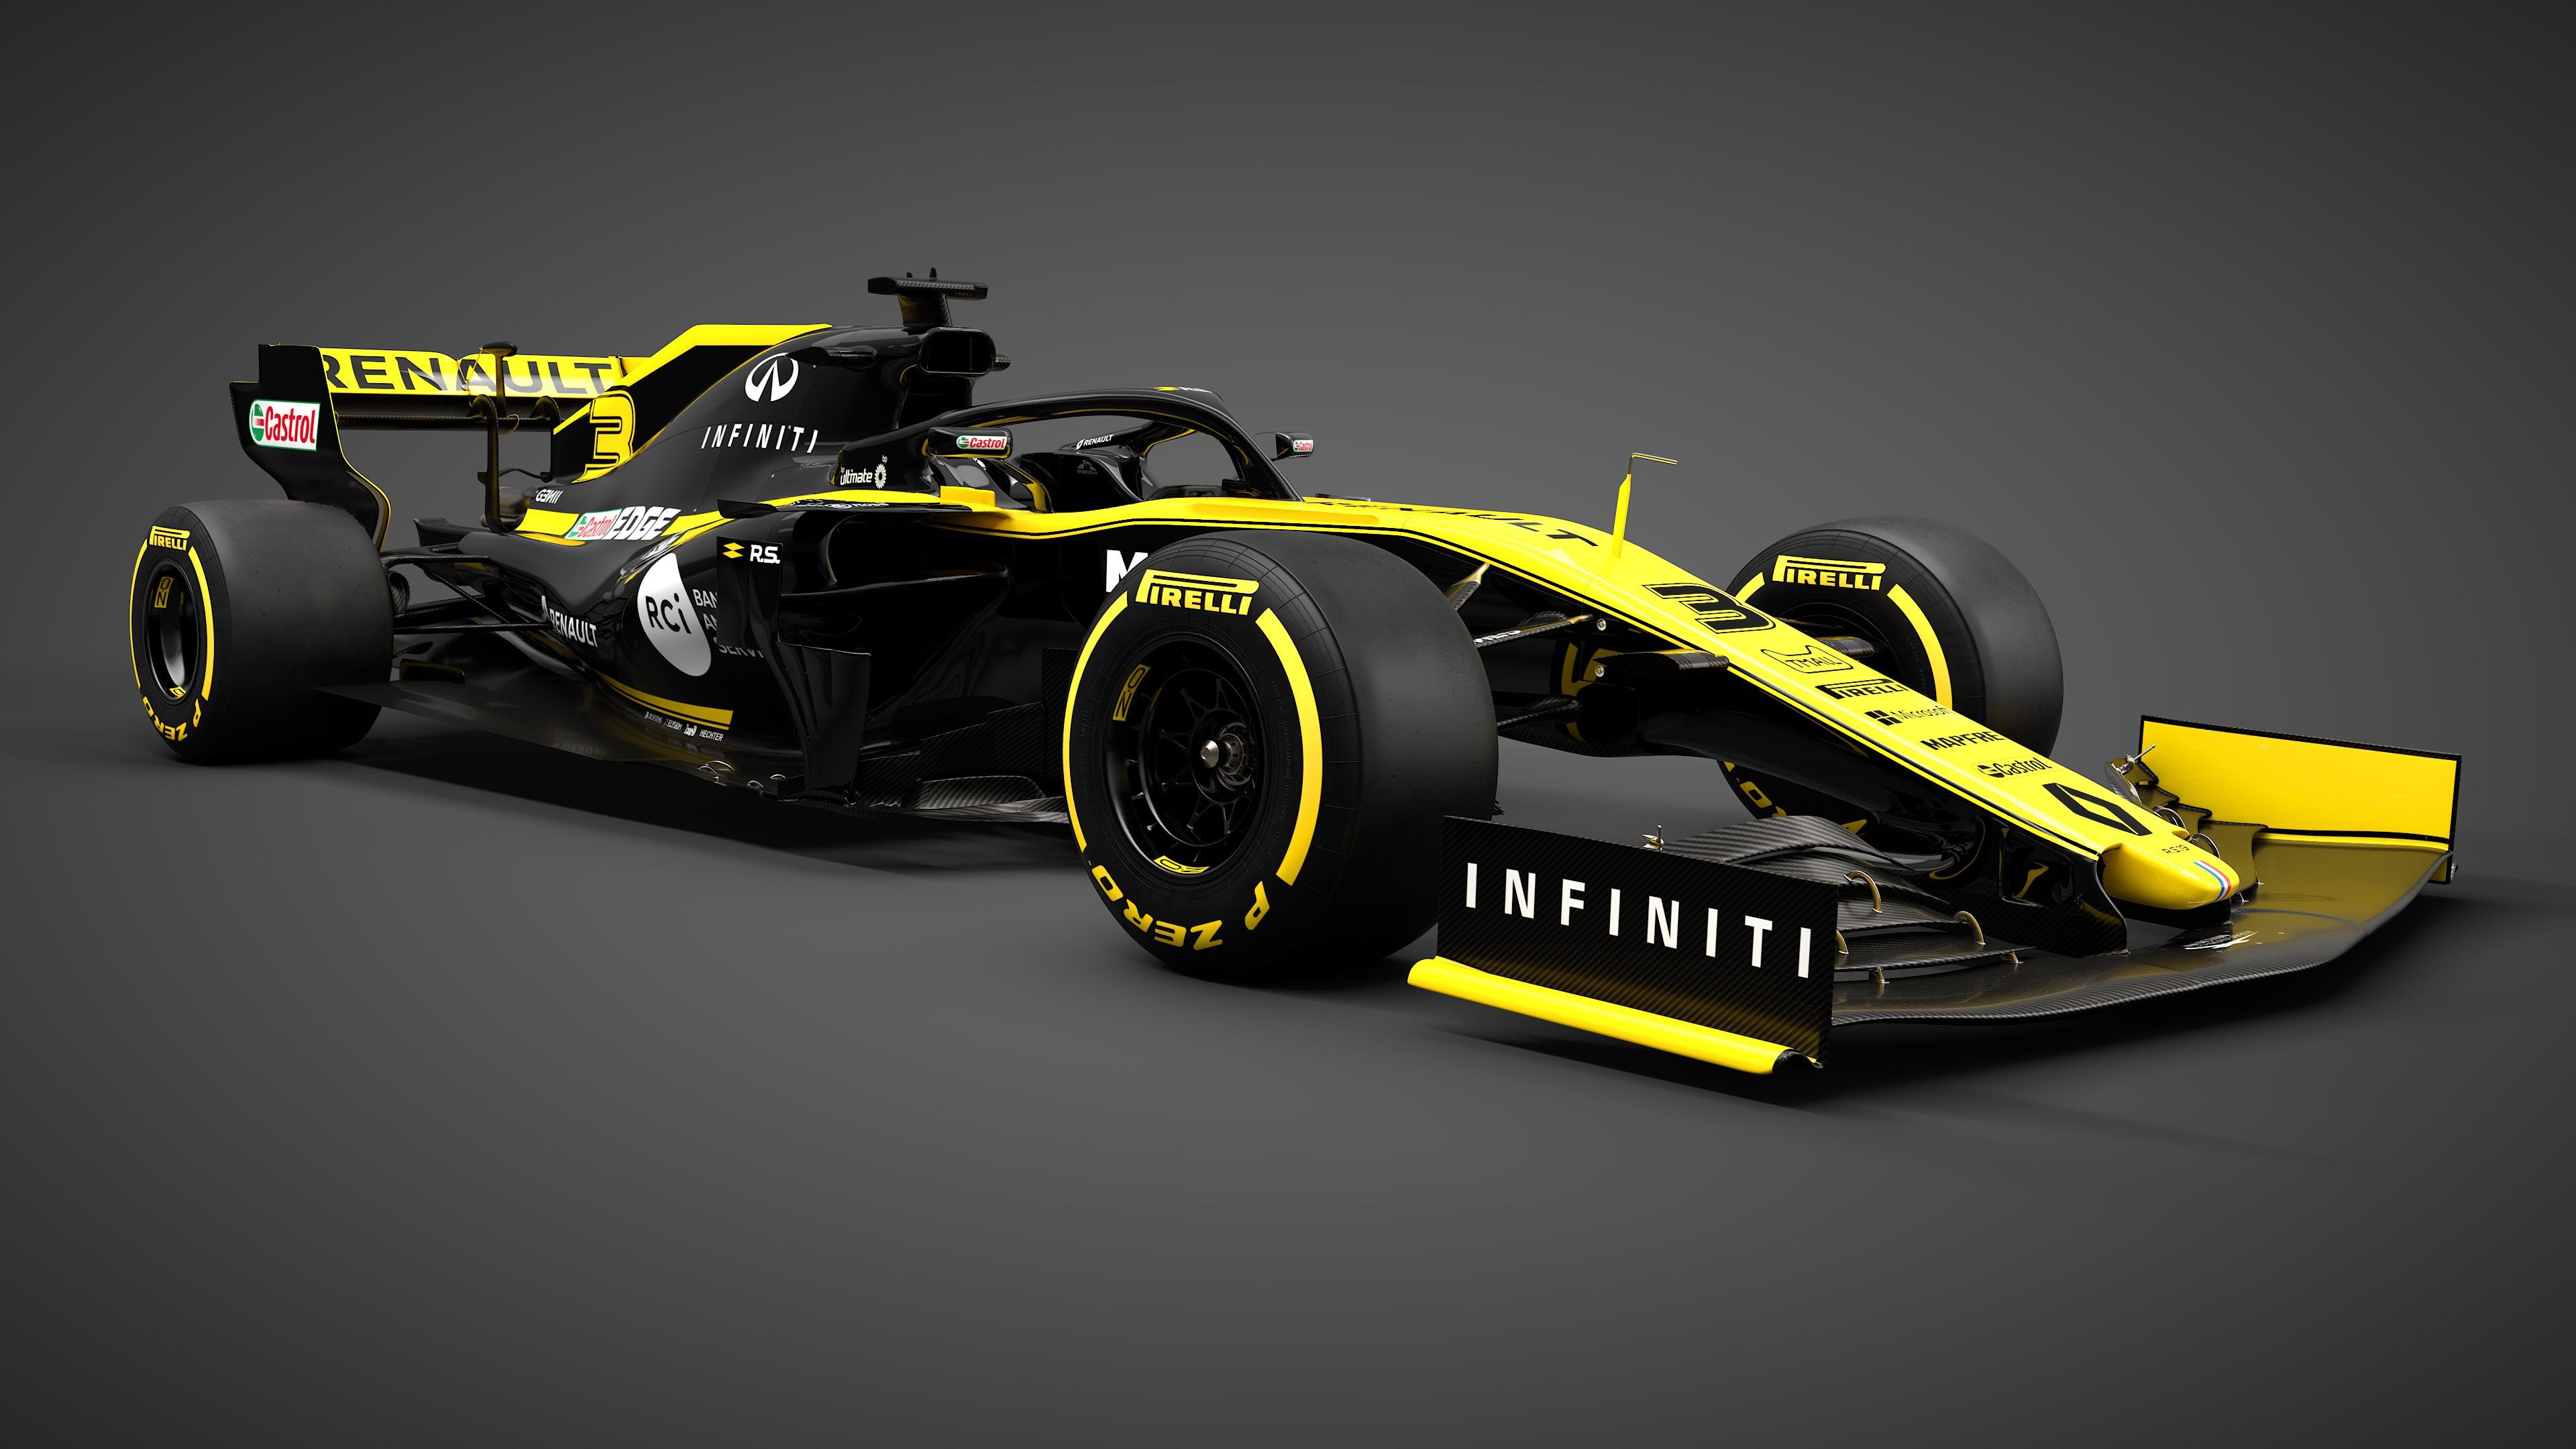 Renault RS19 F1 car launch picture